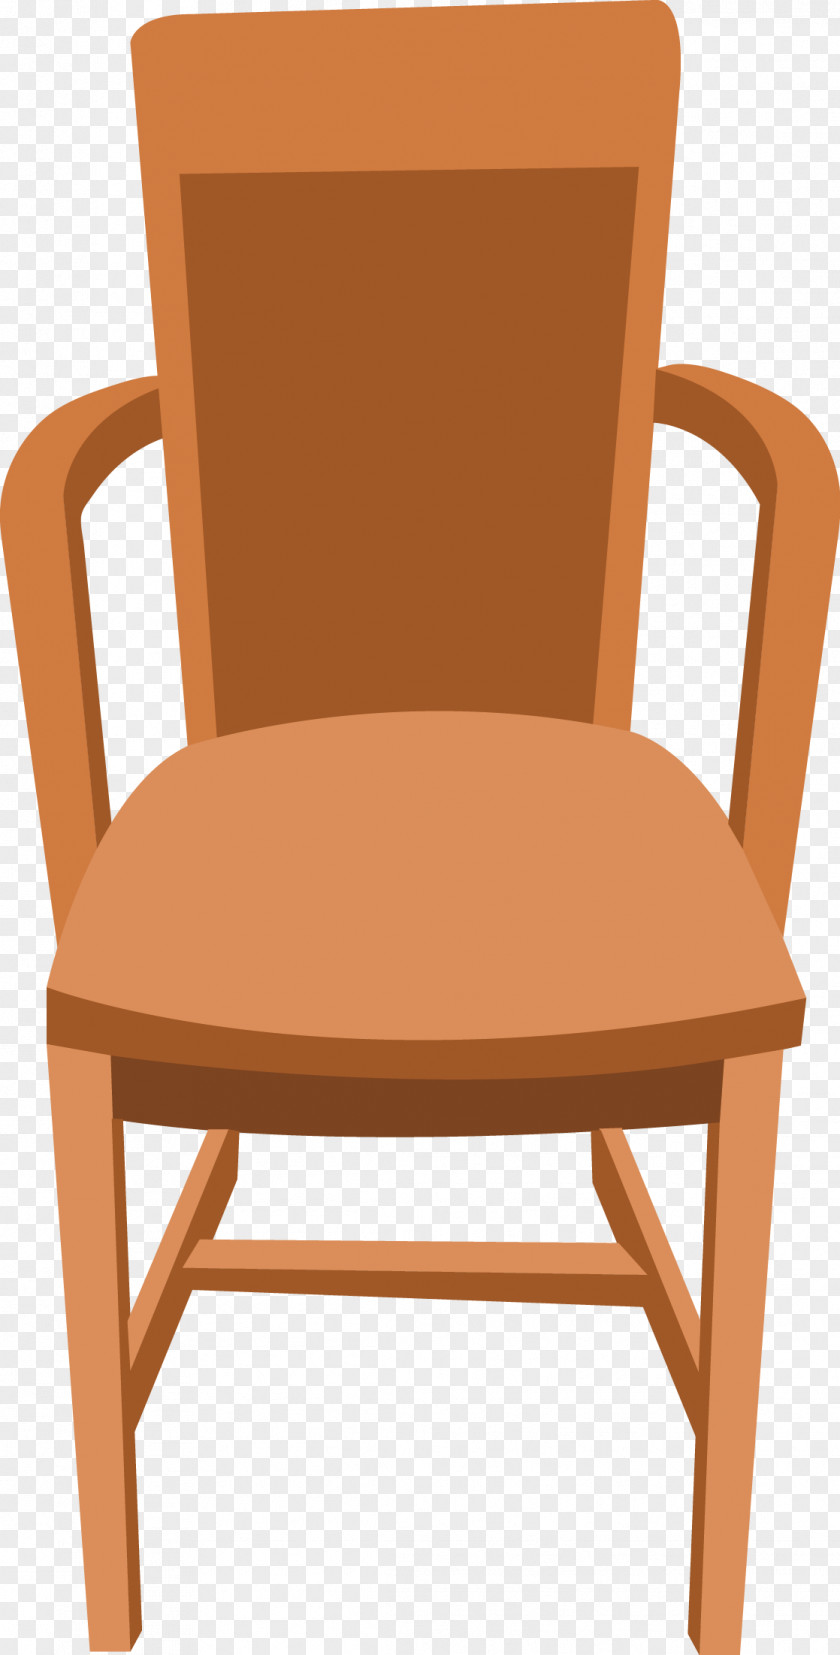 Banquet Wooden Tables And Chairs Chair Table Furniture Wood Stool PNG